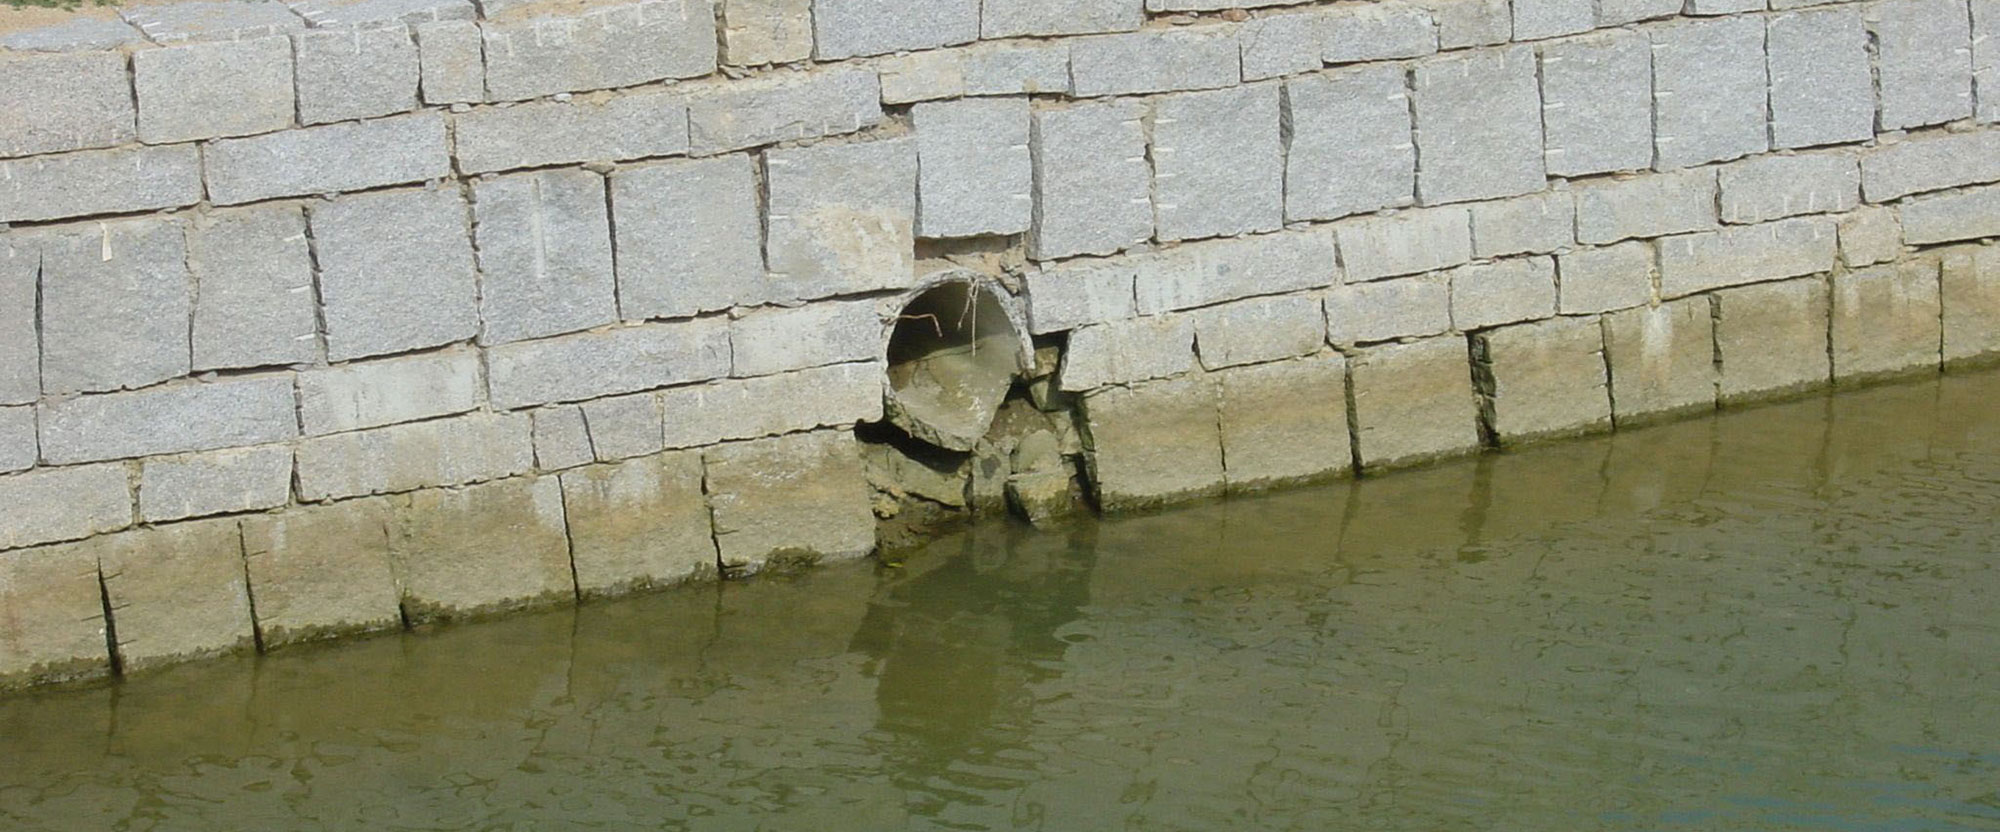 Stormwater outflow at Boao Canal Village, Hainan Province